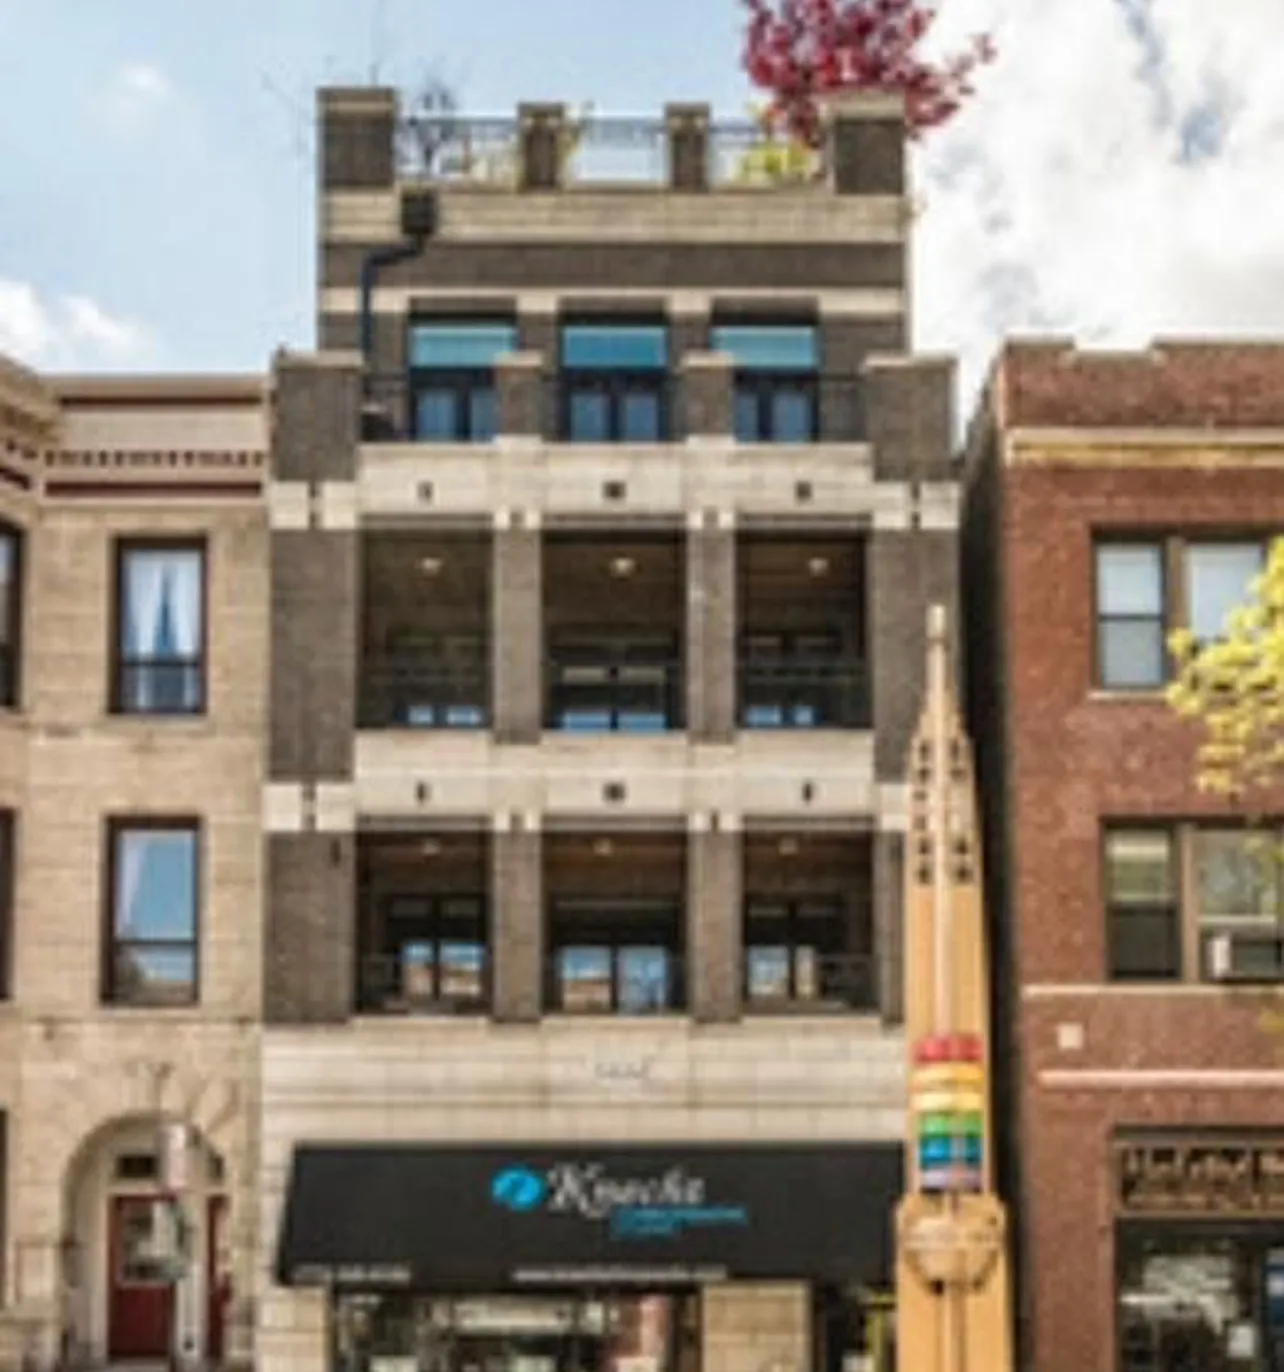 3444 N Halsted St 60657 60657-unit#4-Chicago-IL